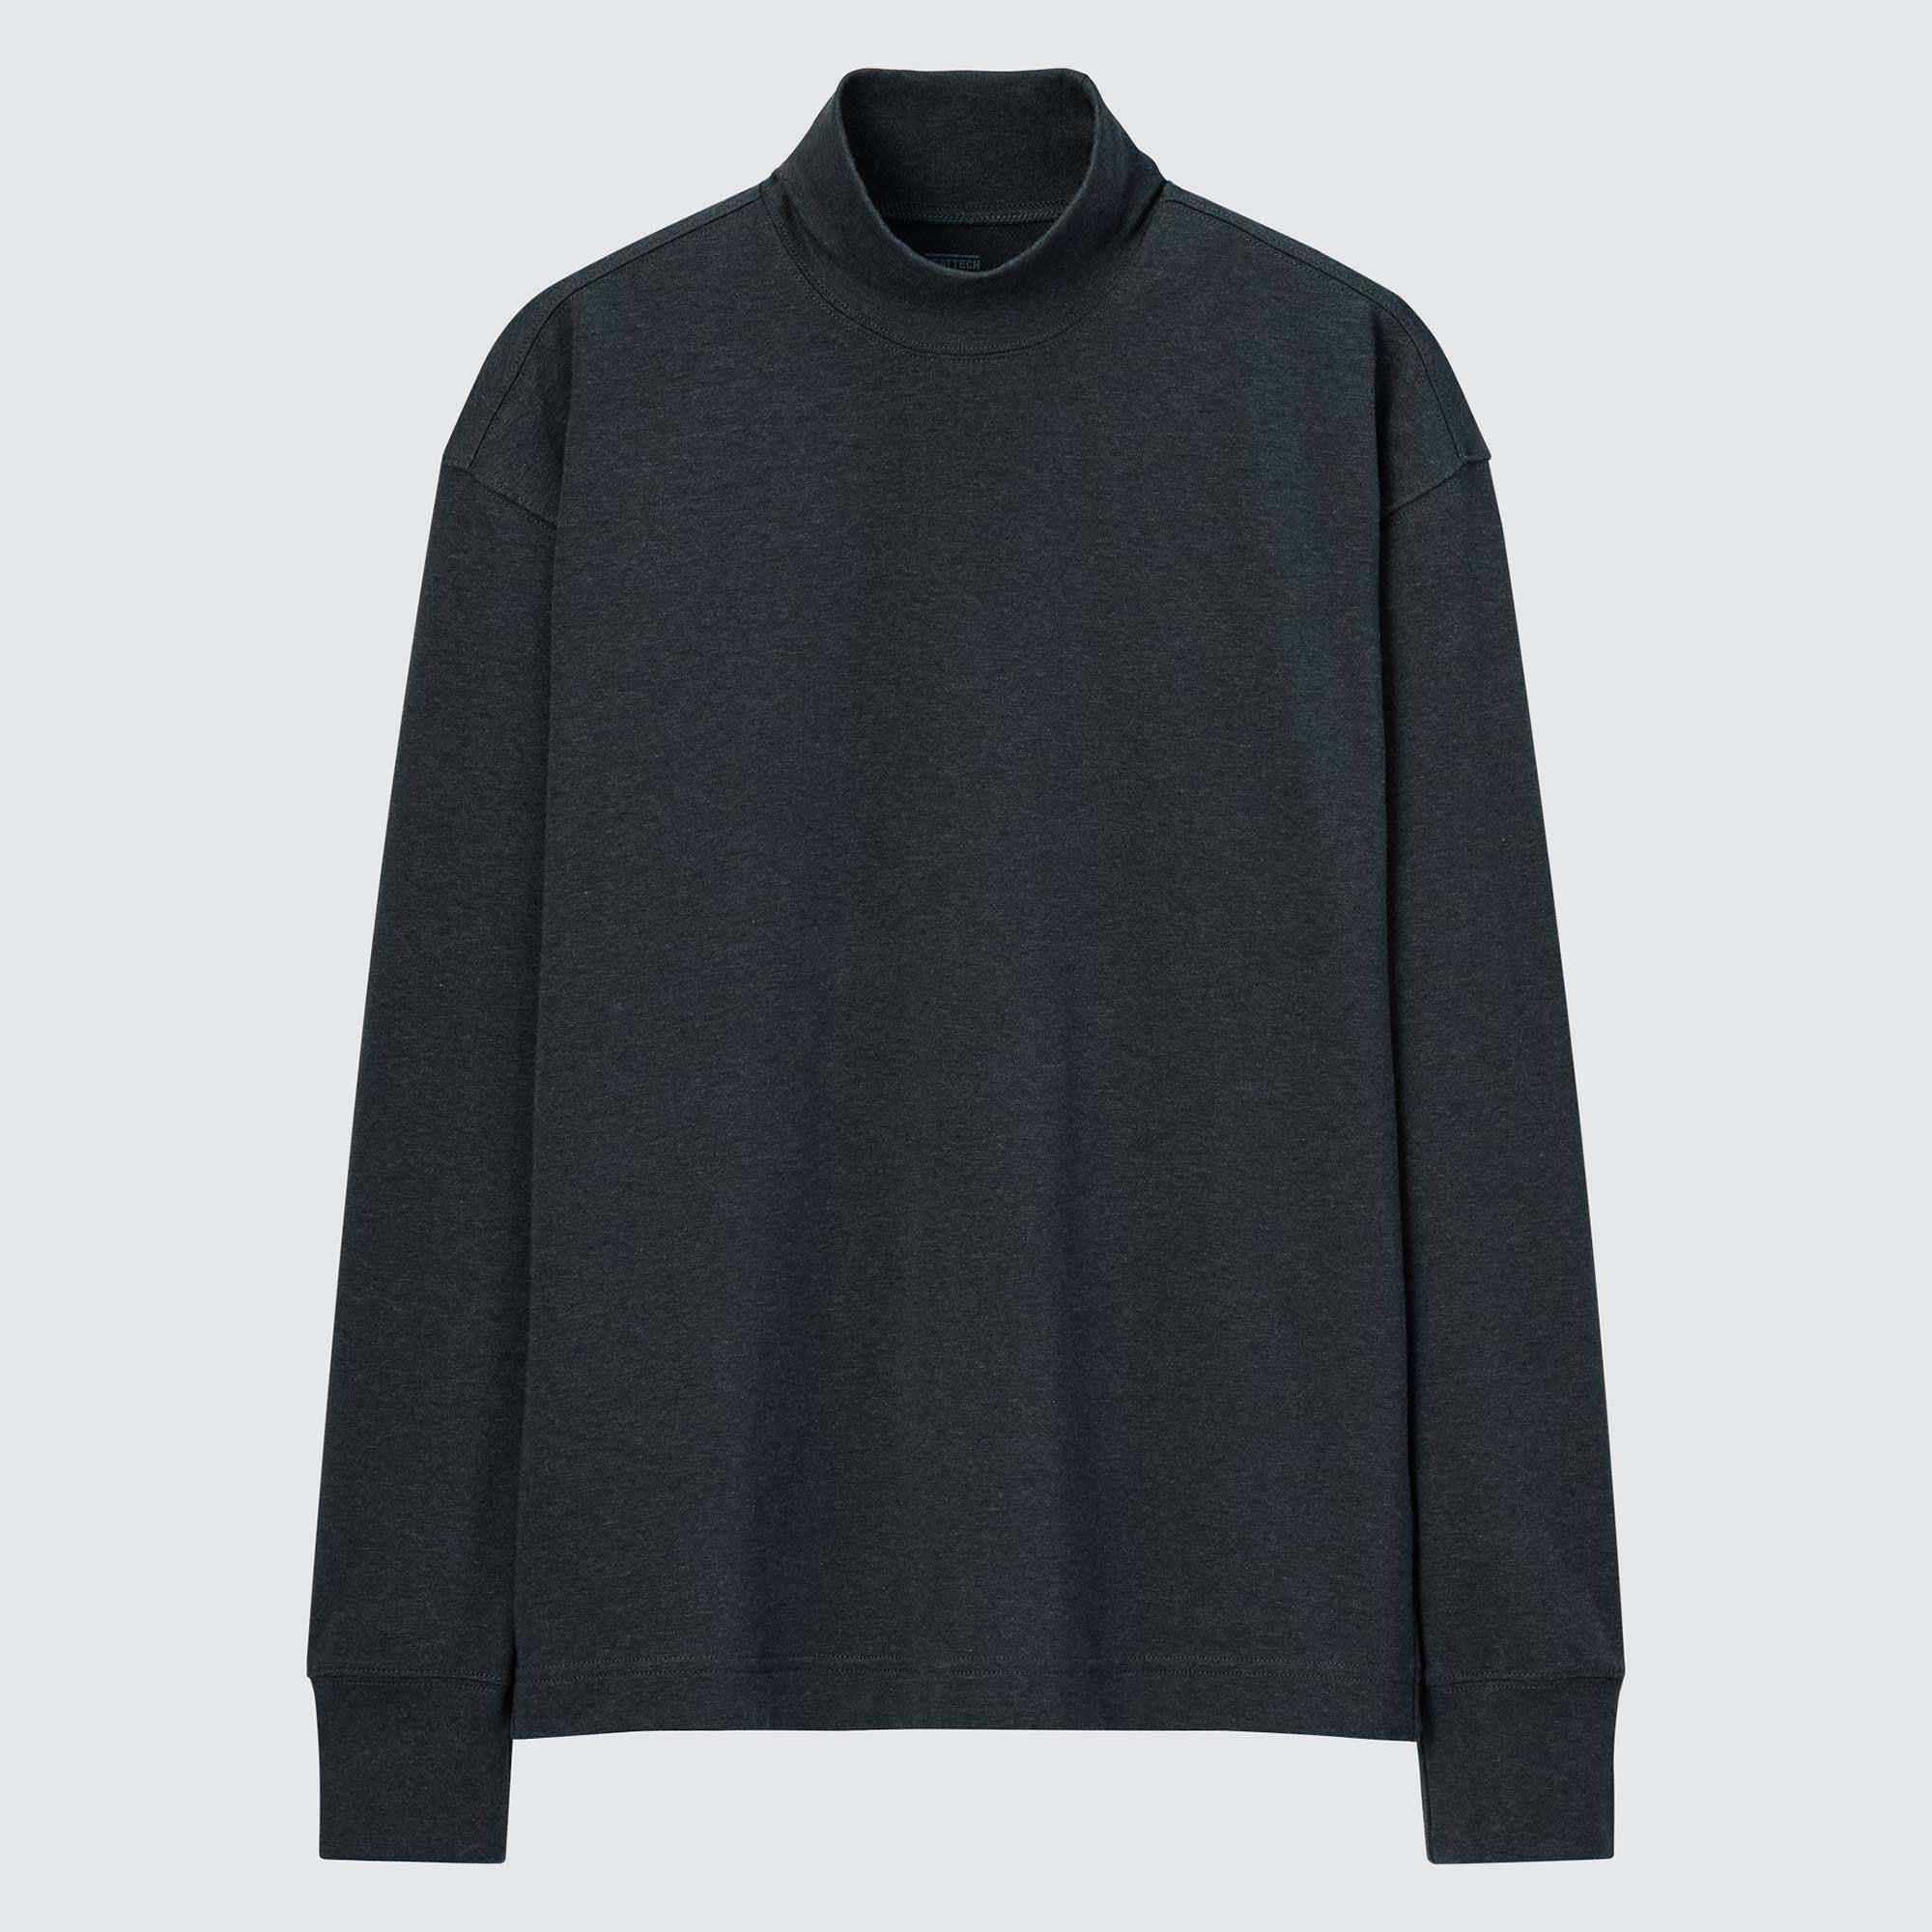 UNIQLO U HEATTECH Extra Warm Cotton Turtleneck Long Sleeved Thermal Top, Where To Buy, 452620-COL01